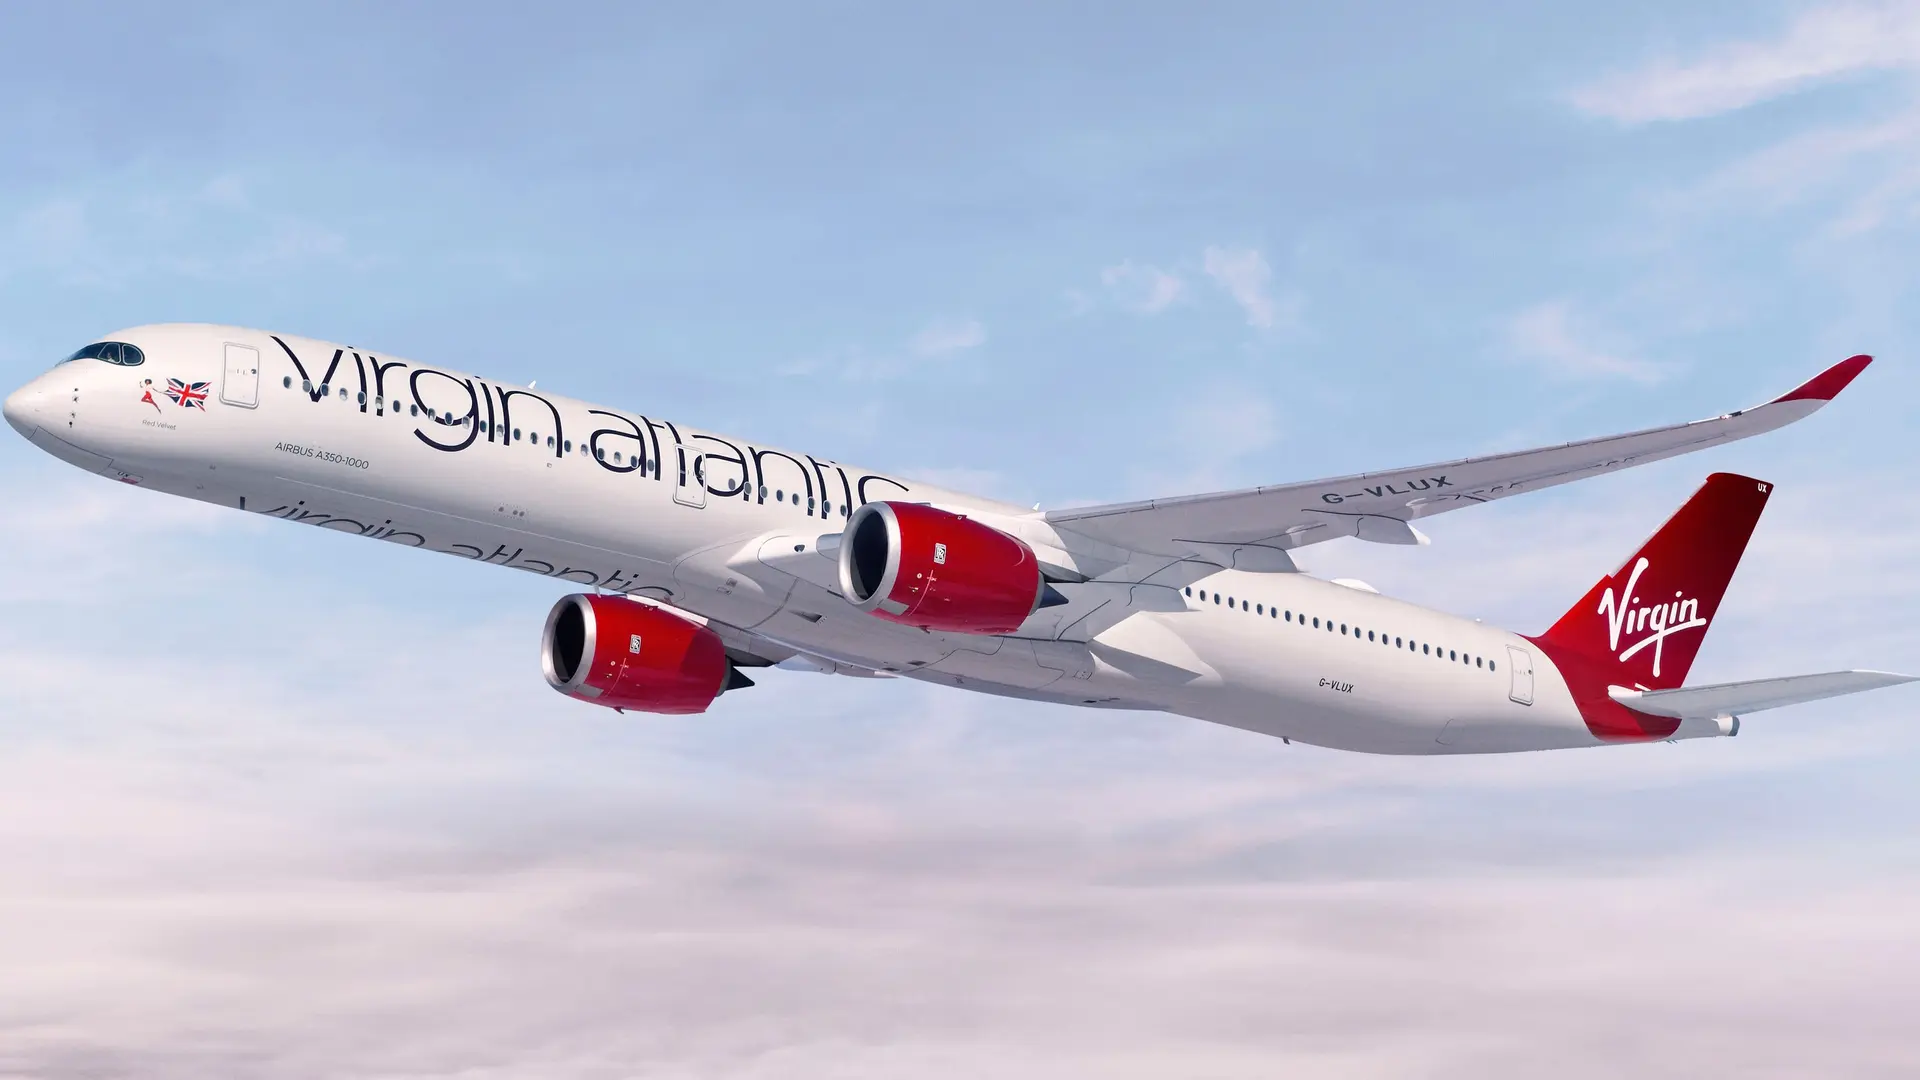 Airline review Sustainability - Virgin Atlantic - 3